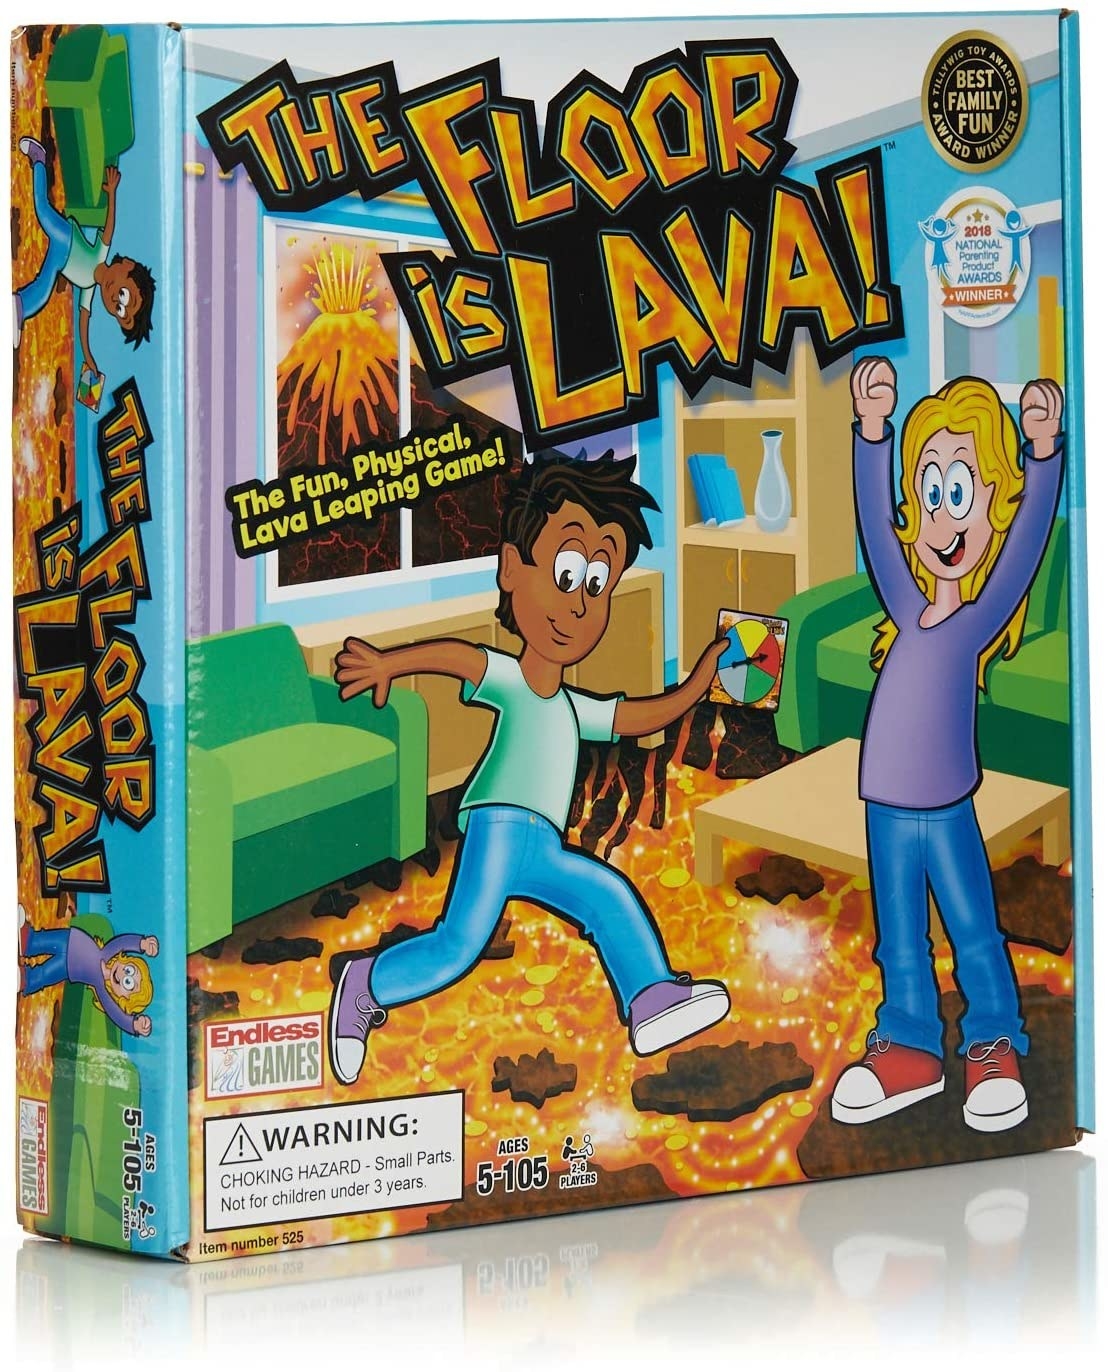 Box art for The Floor Is Lava with illustrated children playing the game